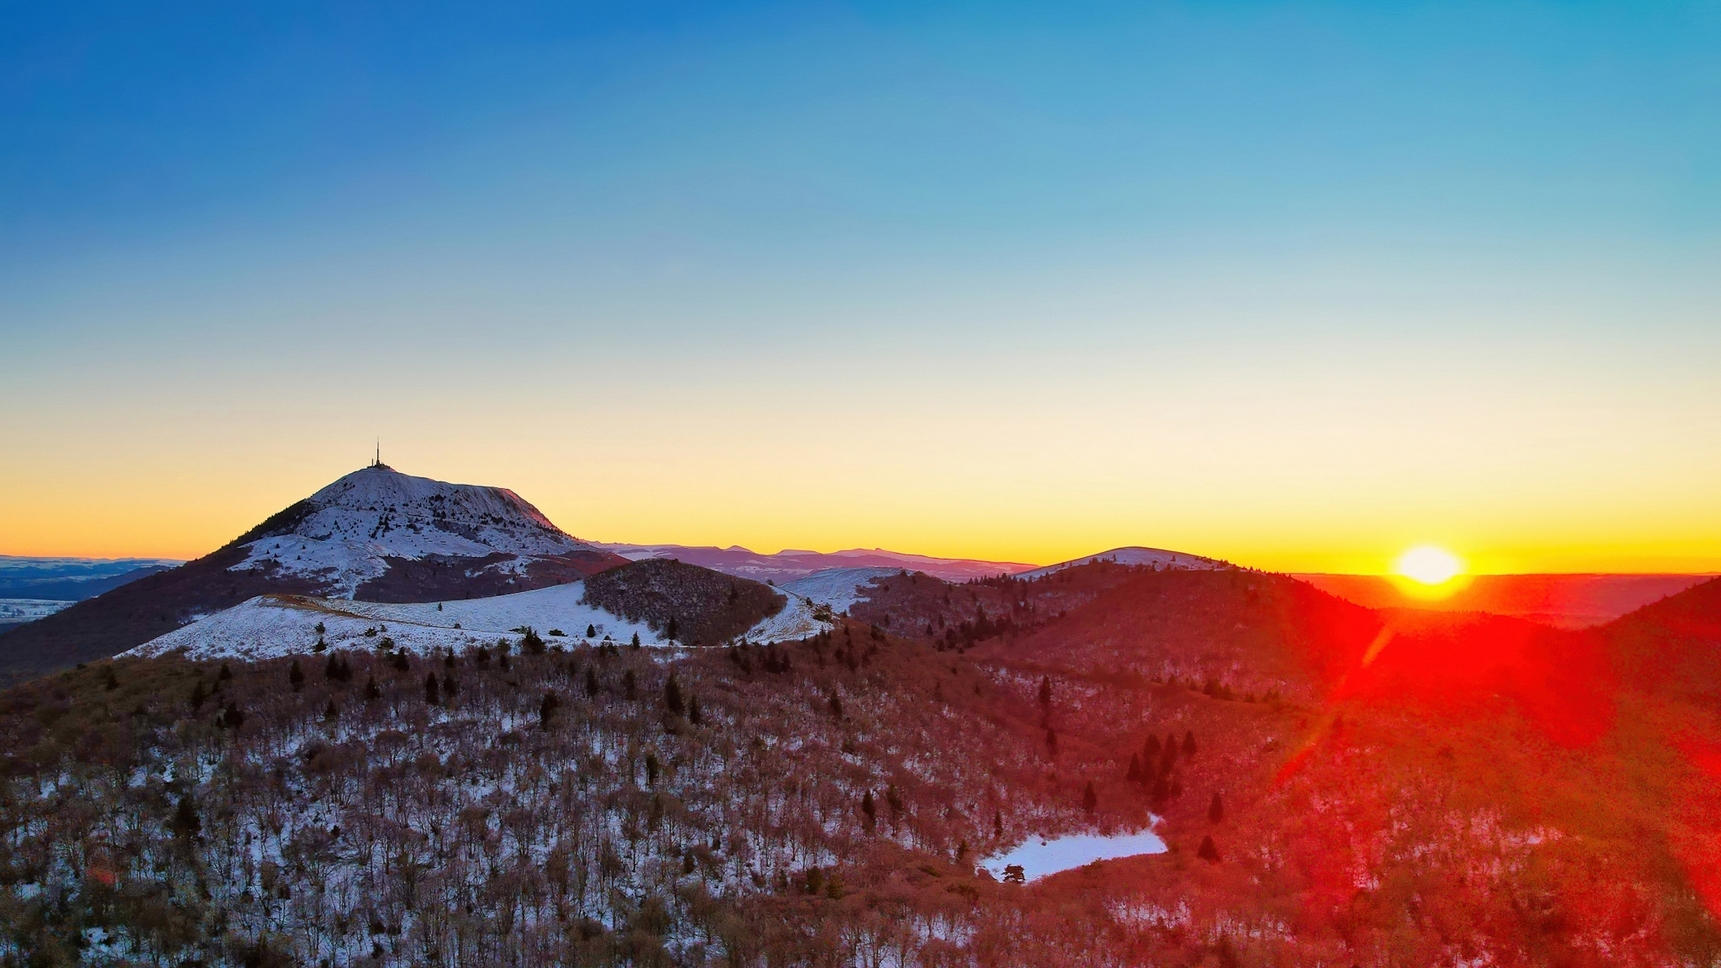 Sunset over the snow-capped Puy de Dome